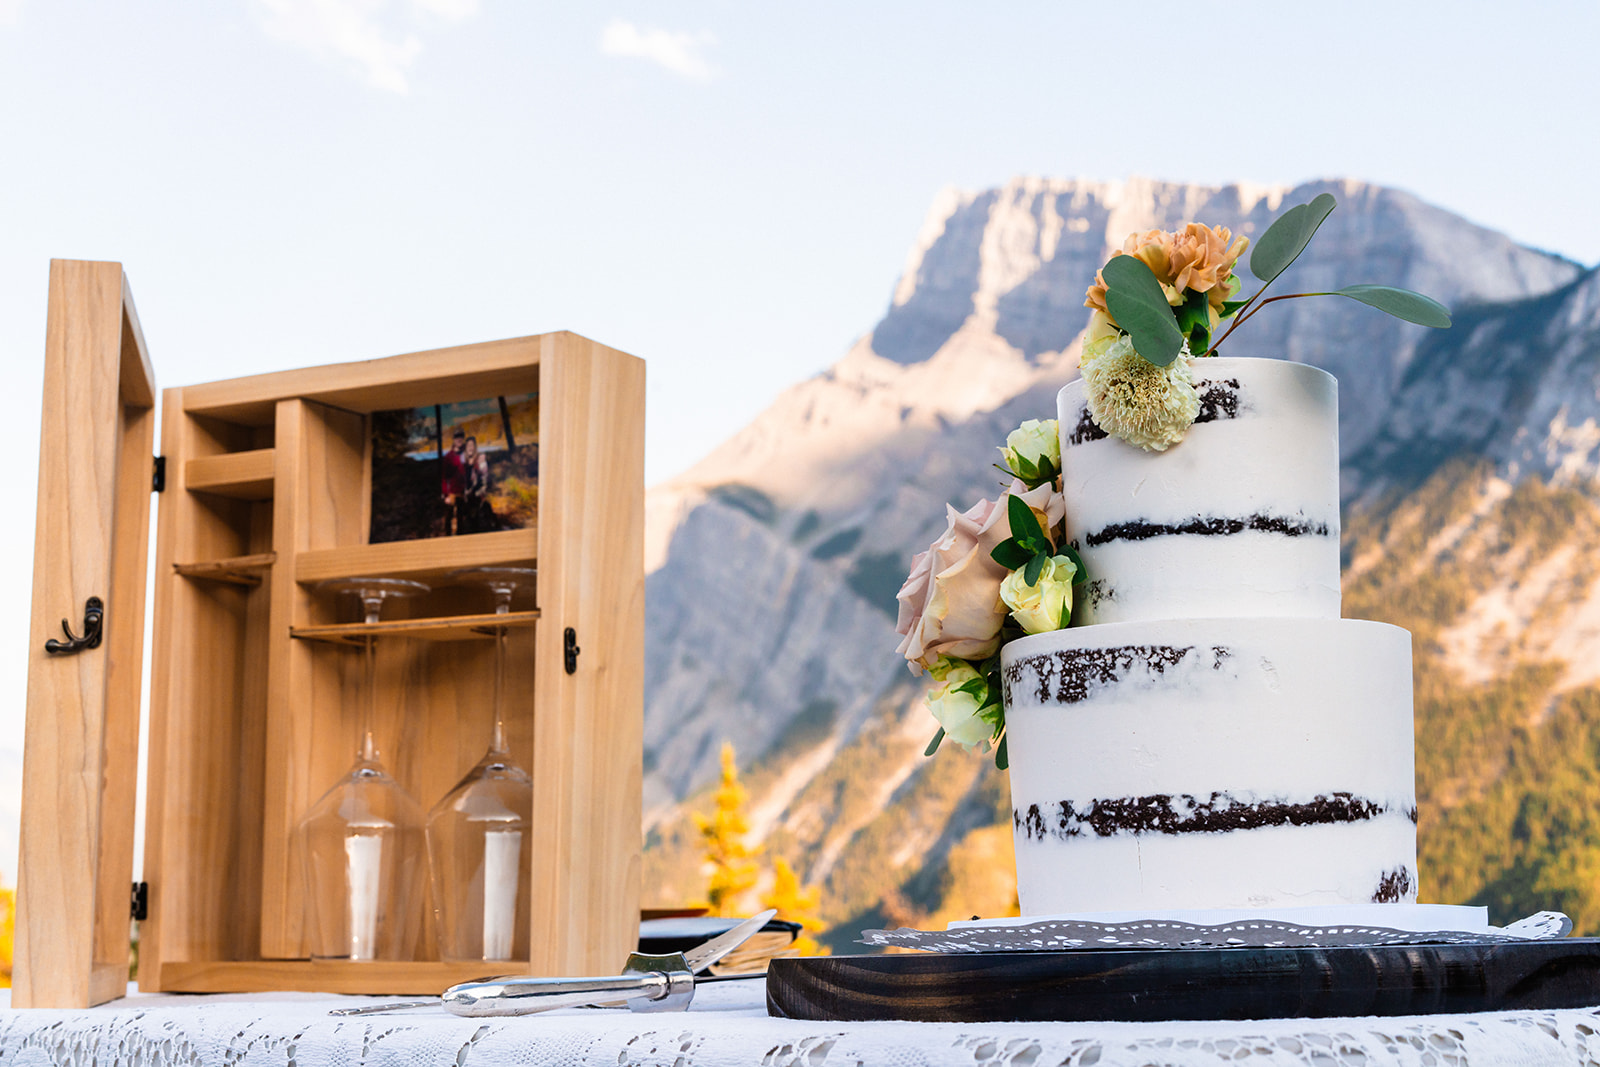 Beautiful white wedding cake next to wooden time capsule box with champagne glasses